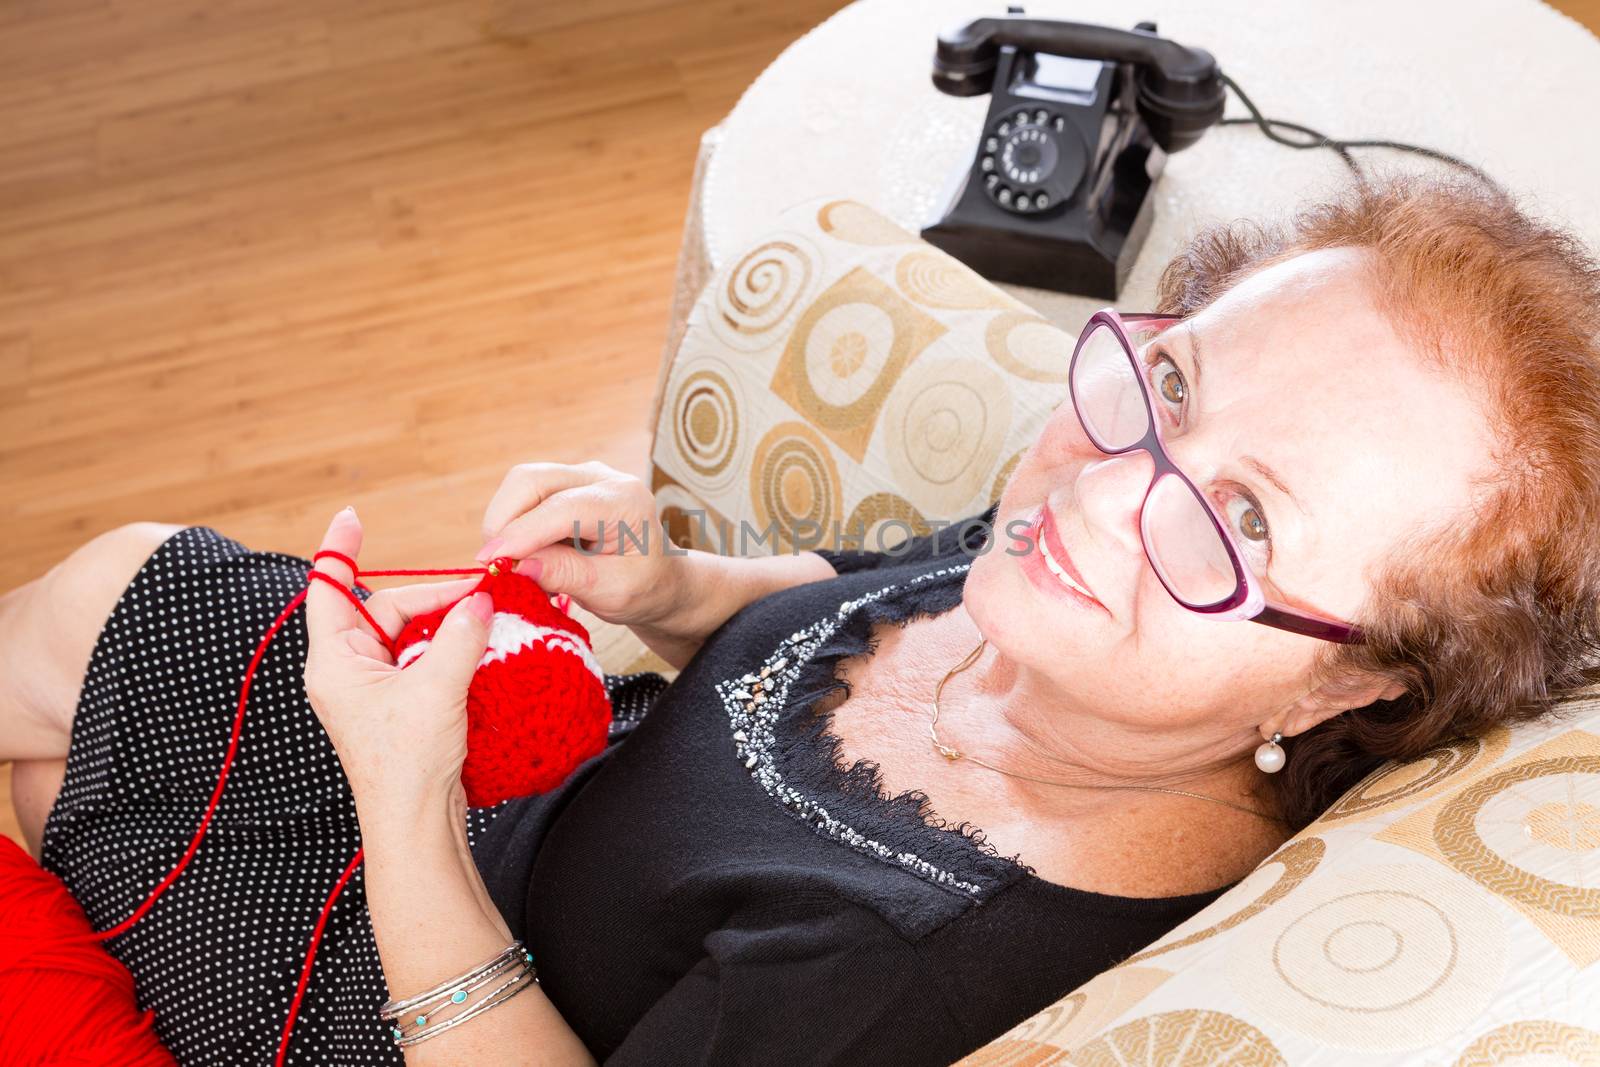 Elderly grandmother wearing eyeglasses sitting knitting in a chair looking up at the camera with a smile, old fashioned rotary telephone alongside her, high angle view